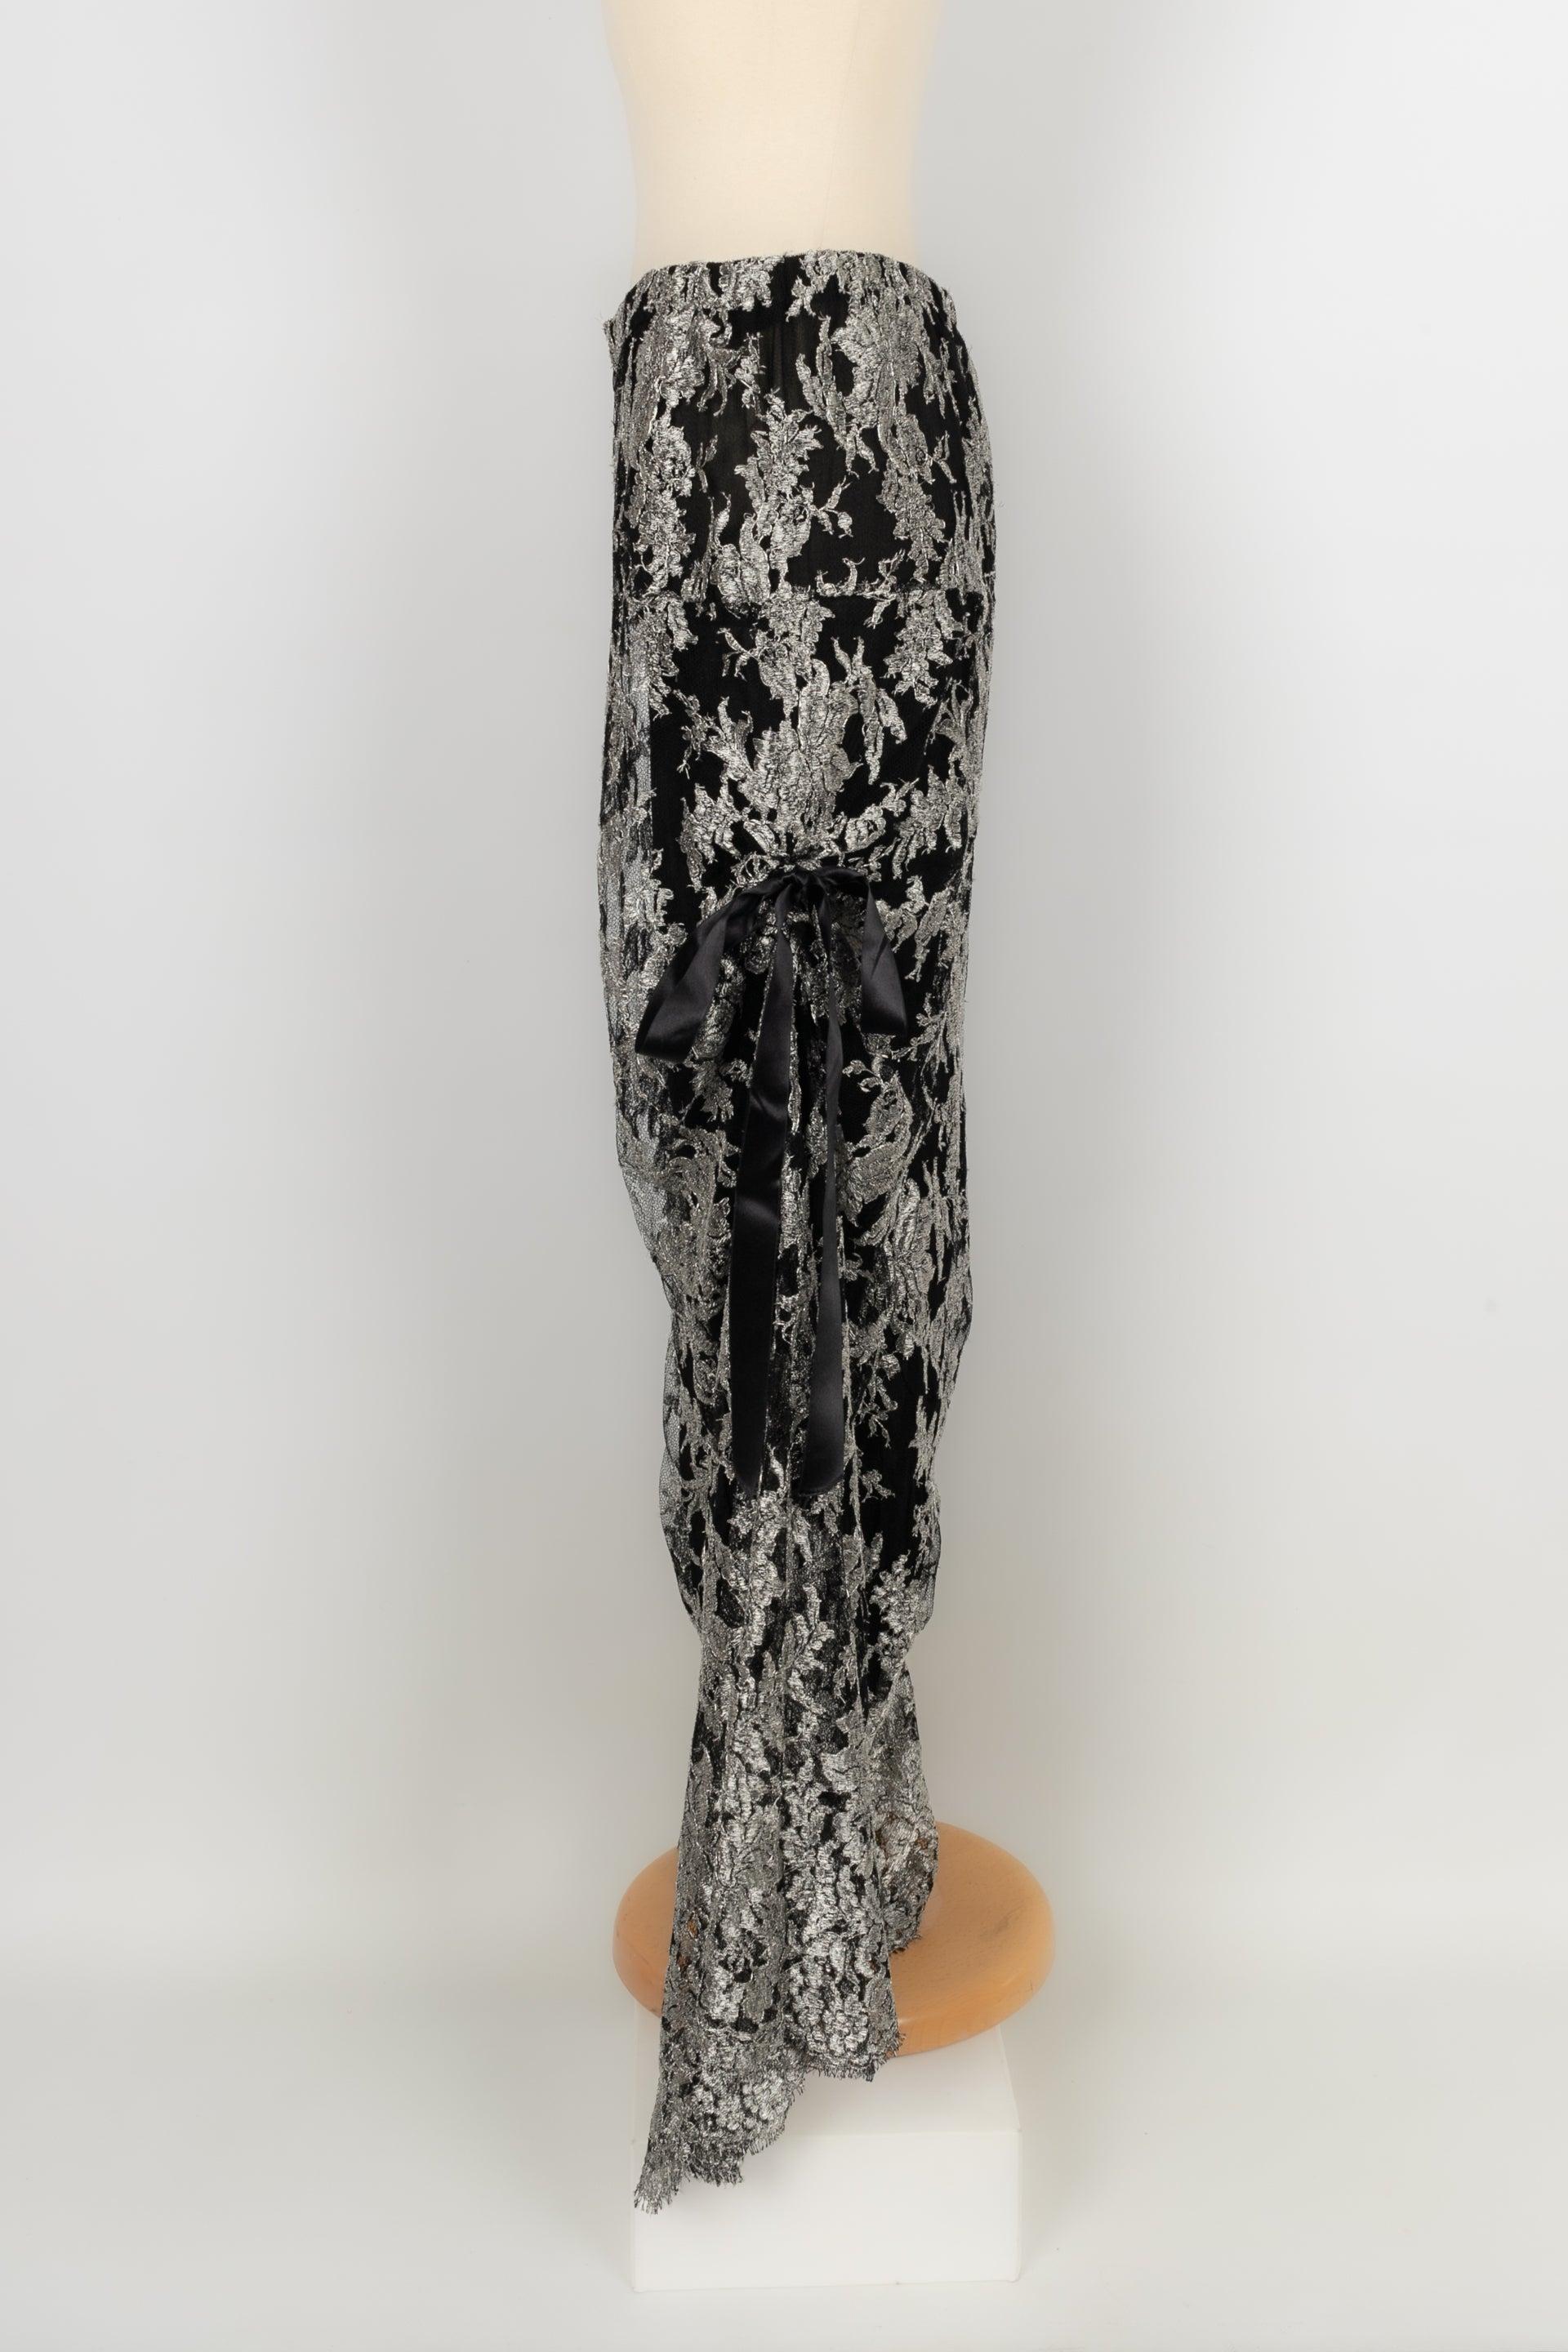 Christian Lacroix - Pants embroidered with silvery lurex yarns on black tulle. Indicated size 36FR.

Additional information:
Condition: Good condition
Dimensions: Waist: 37 cm
Hips: 48 cm
Length: 110 cm

Seller reference: FJ67